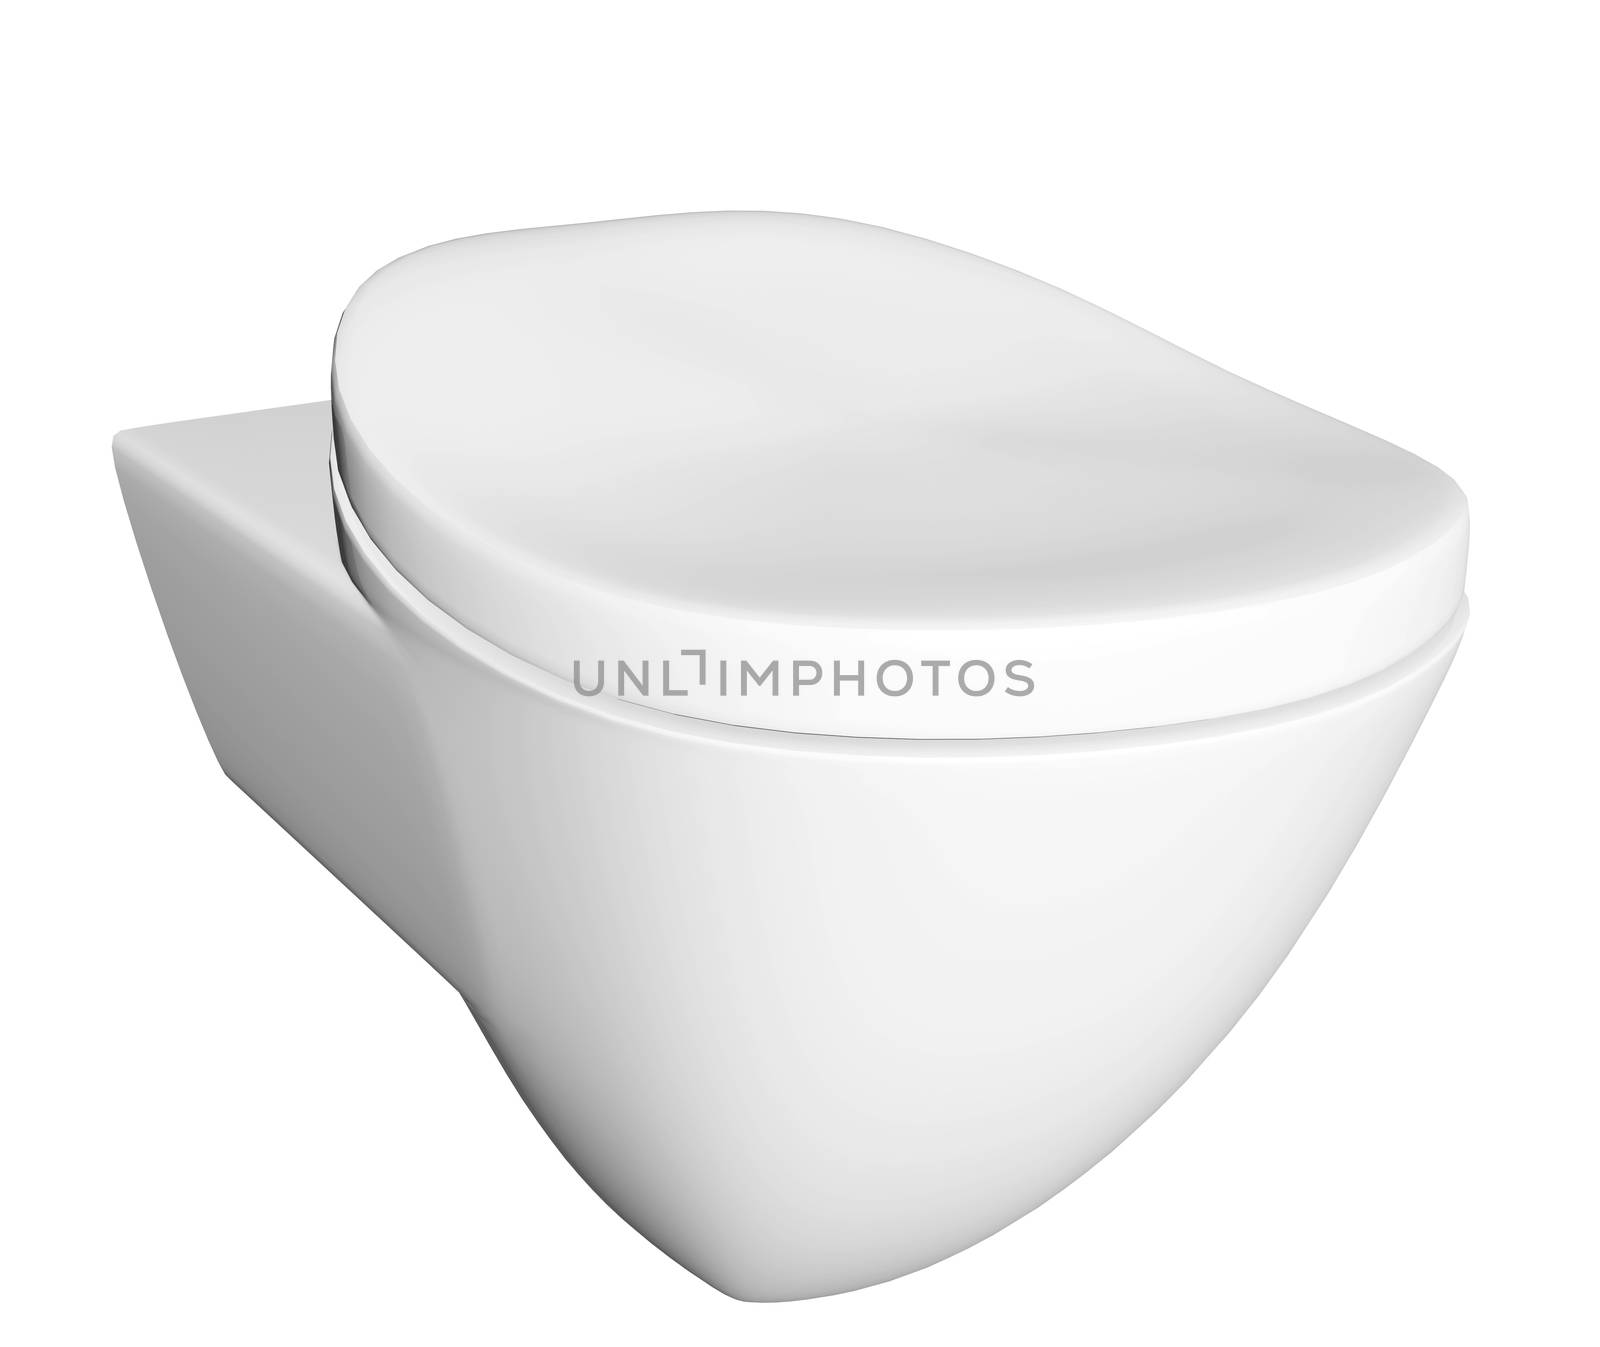 Modern white ceramic and acrylic toilet bowl and lid, isolated against a white background. 3D illustration by Morphart